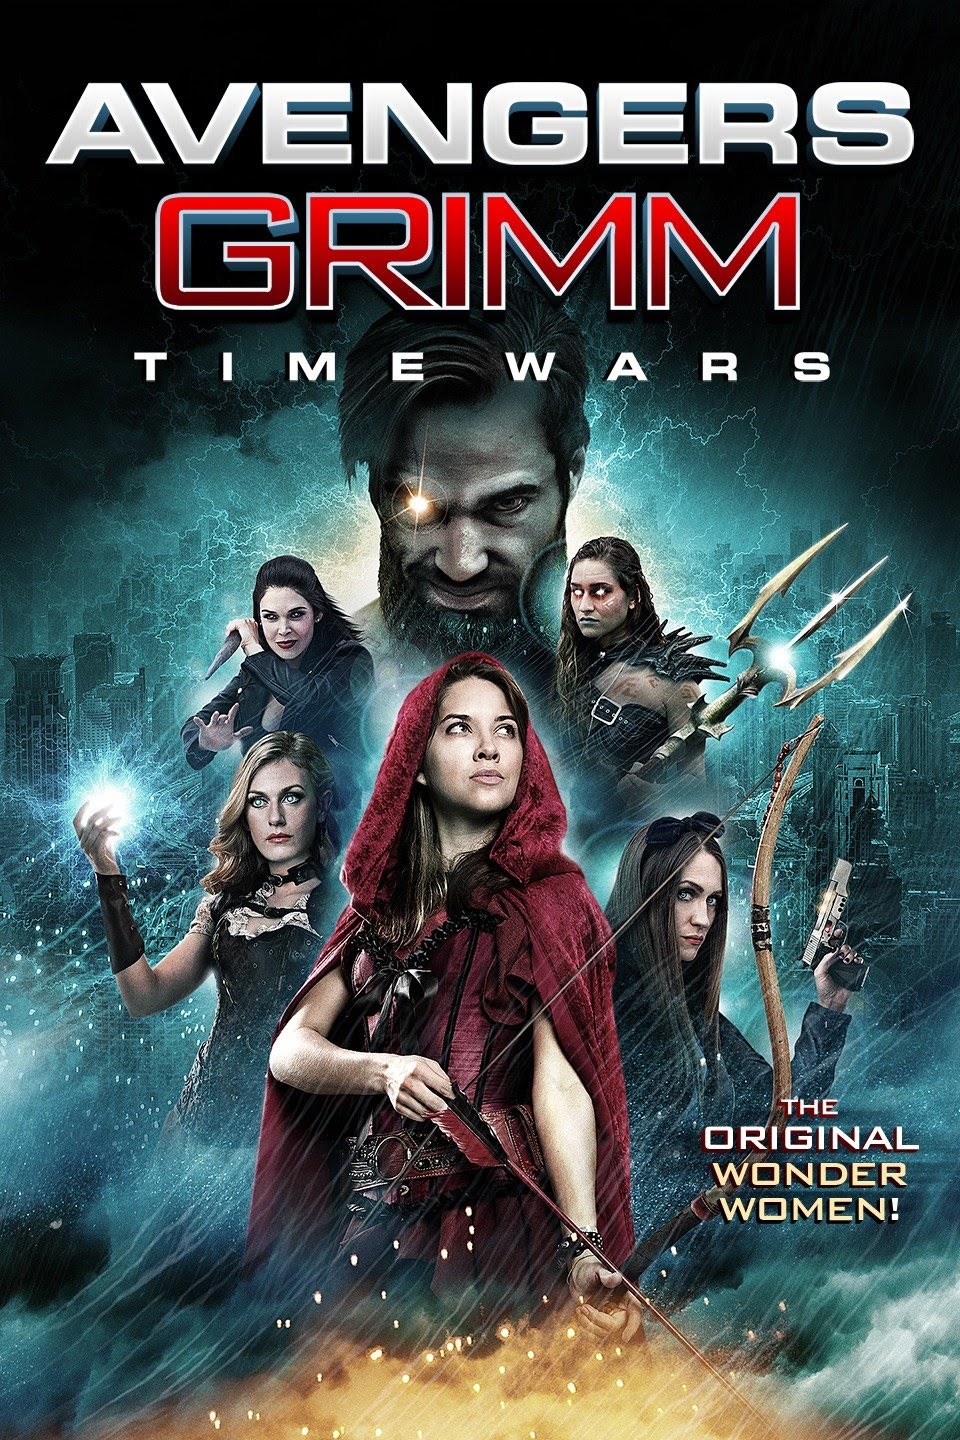 Avengers Grimm Time Wars 2018 Hindi Dubbed Movie download full movie